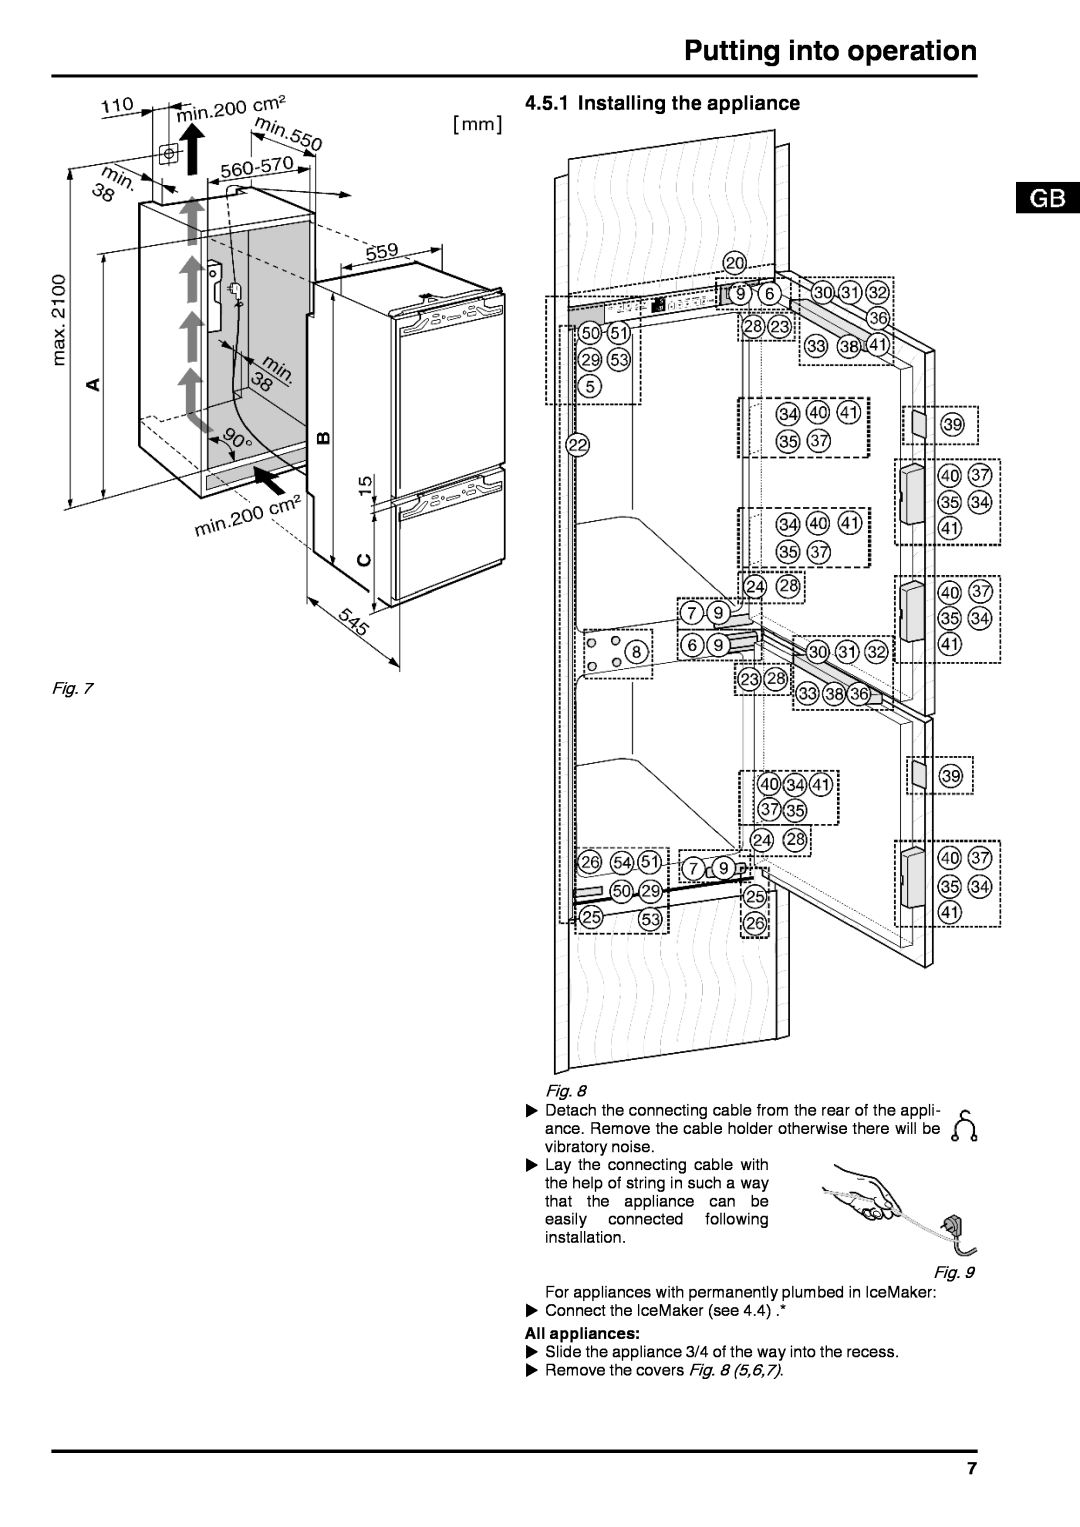 Liebherr 7084284-03 installation instructions Installing the appliance, All appliances, Putting into operation 